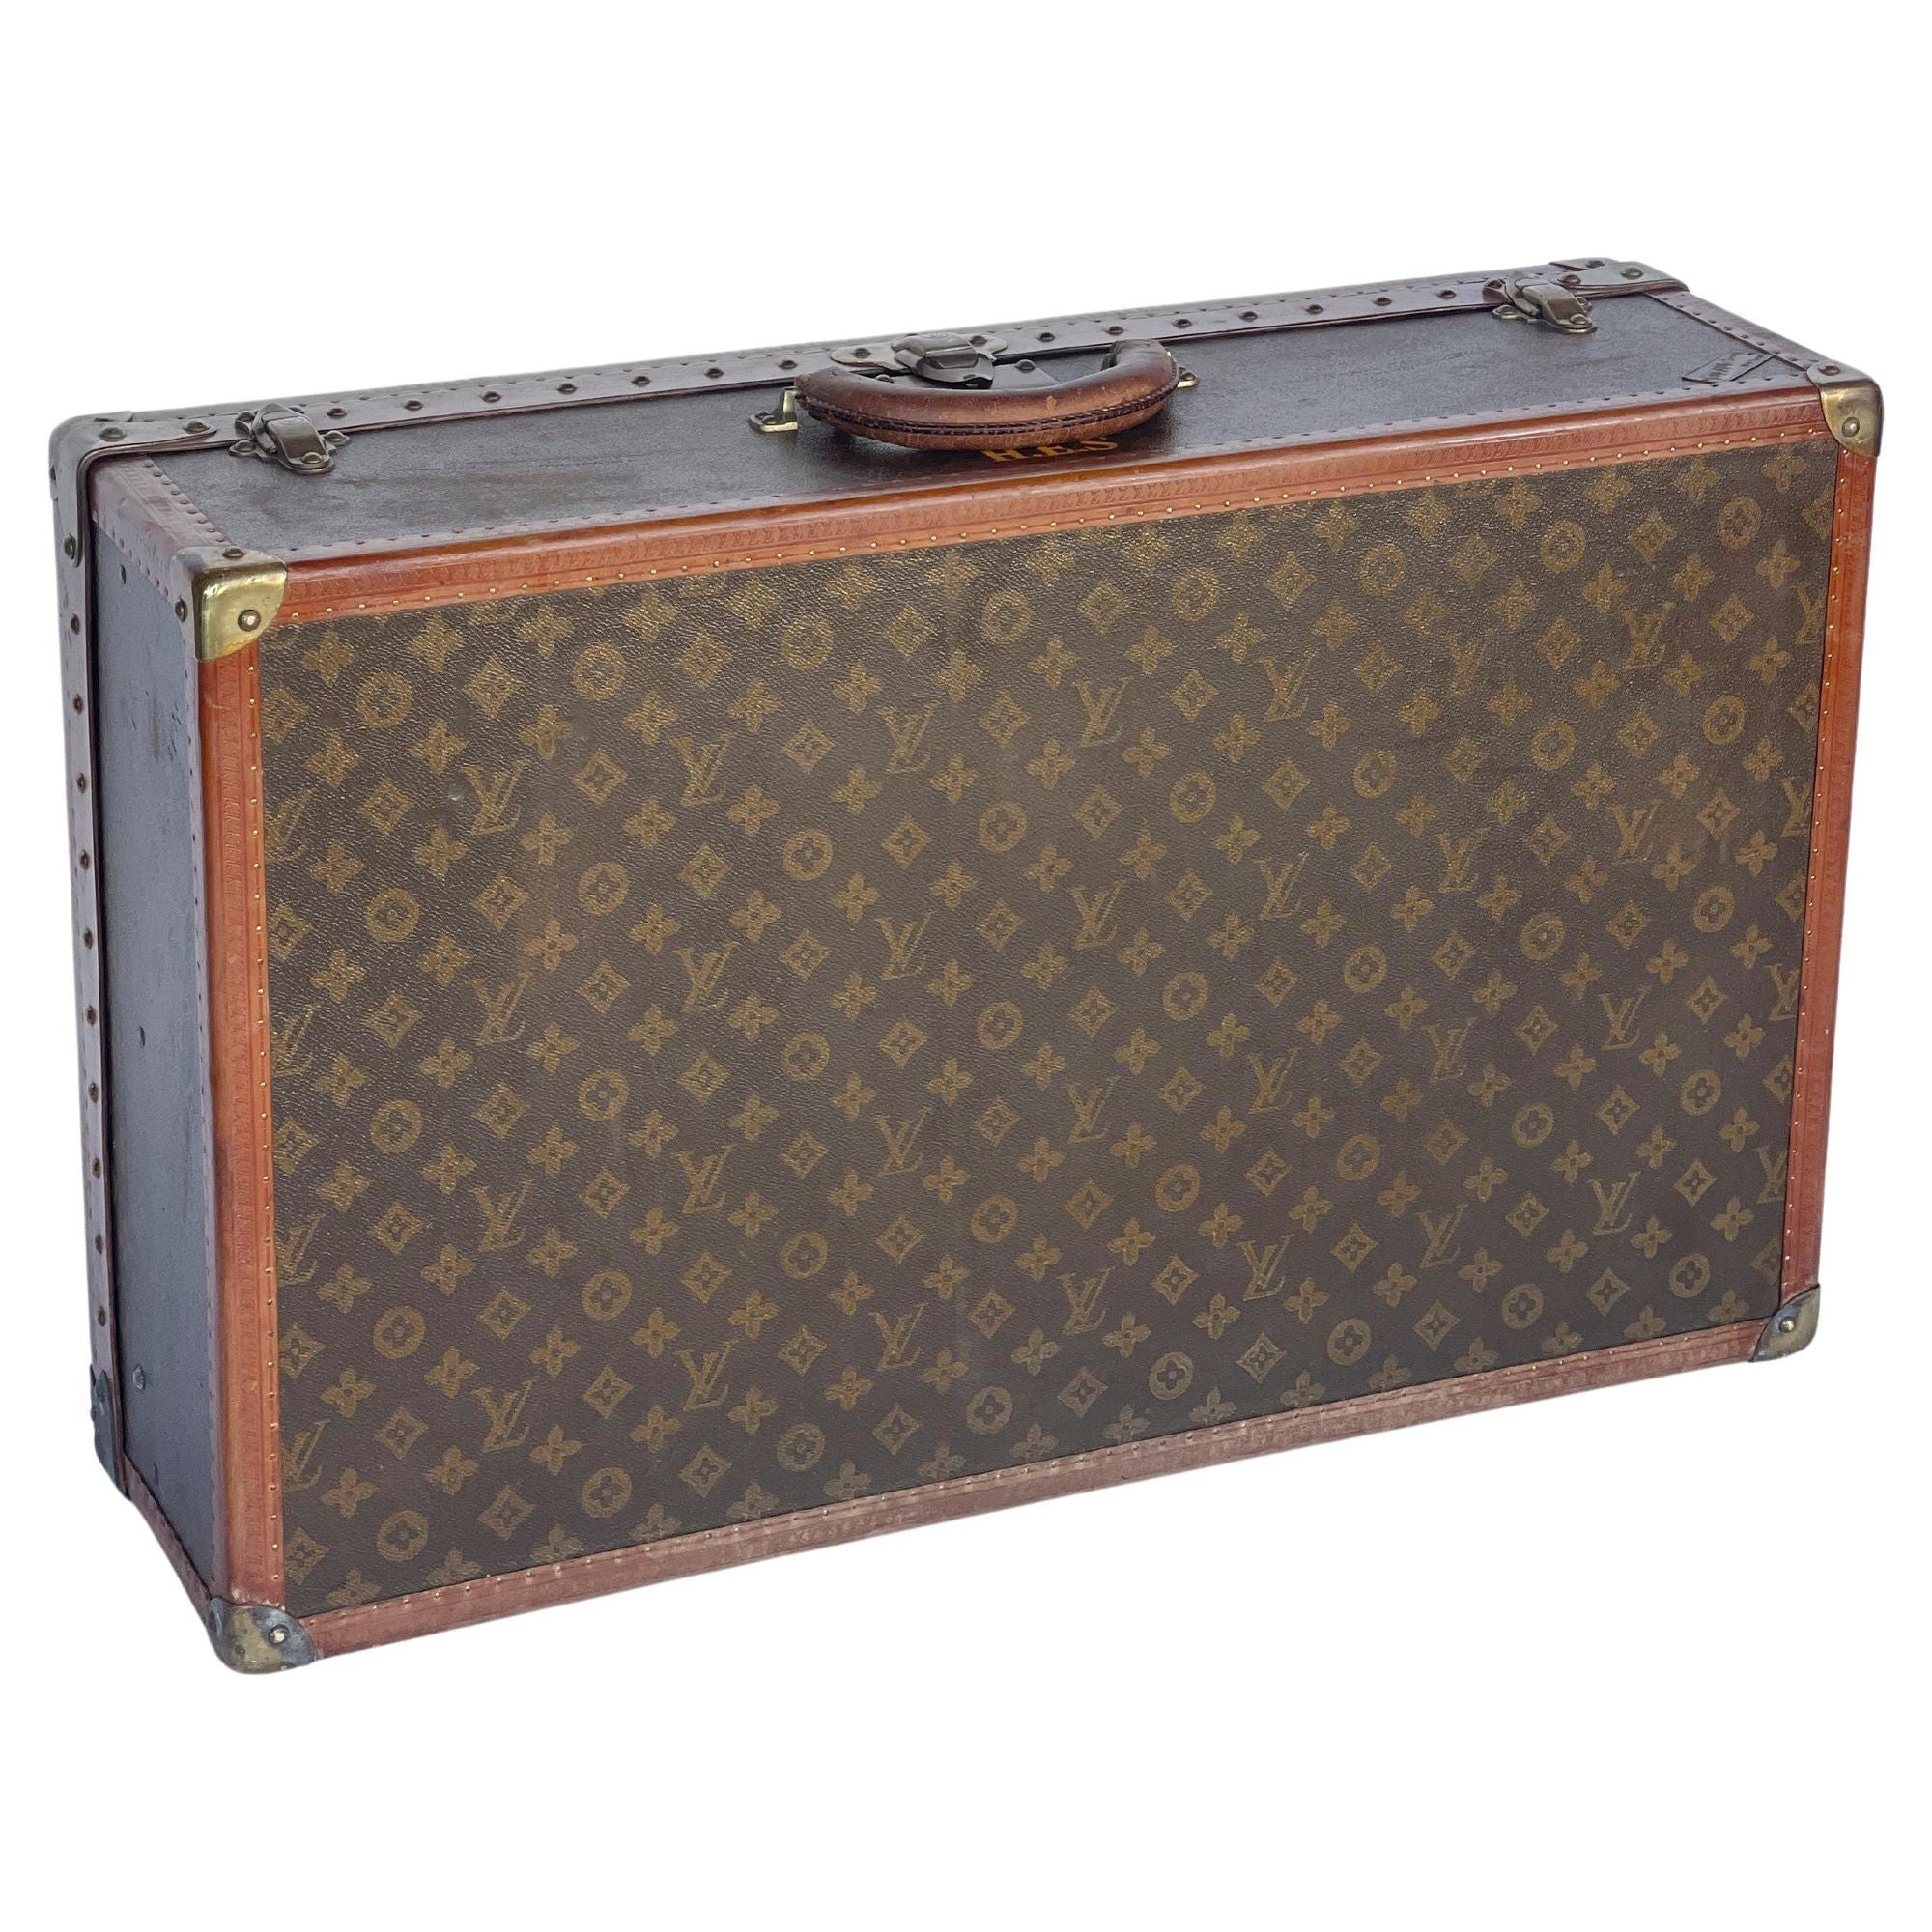 Louis Vuitton Monogram Steamer Trunk With Tray Antique French Luggage